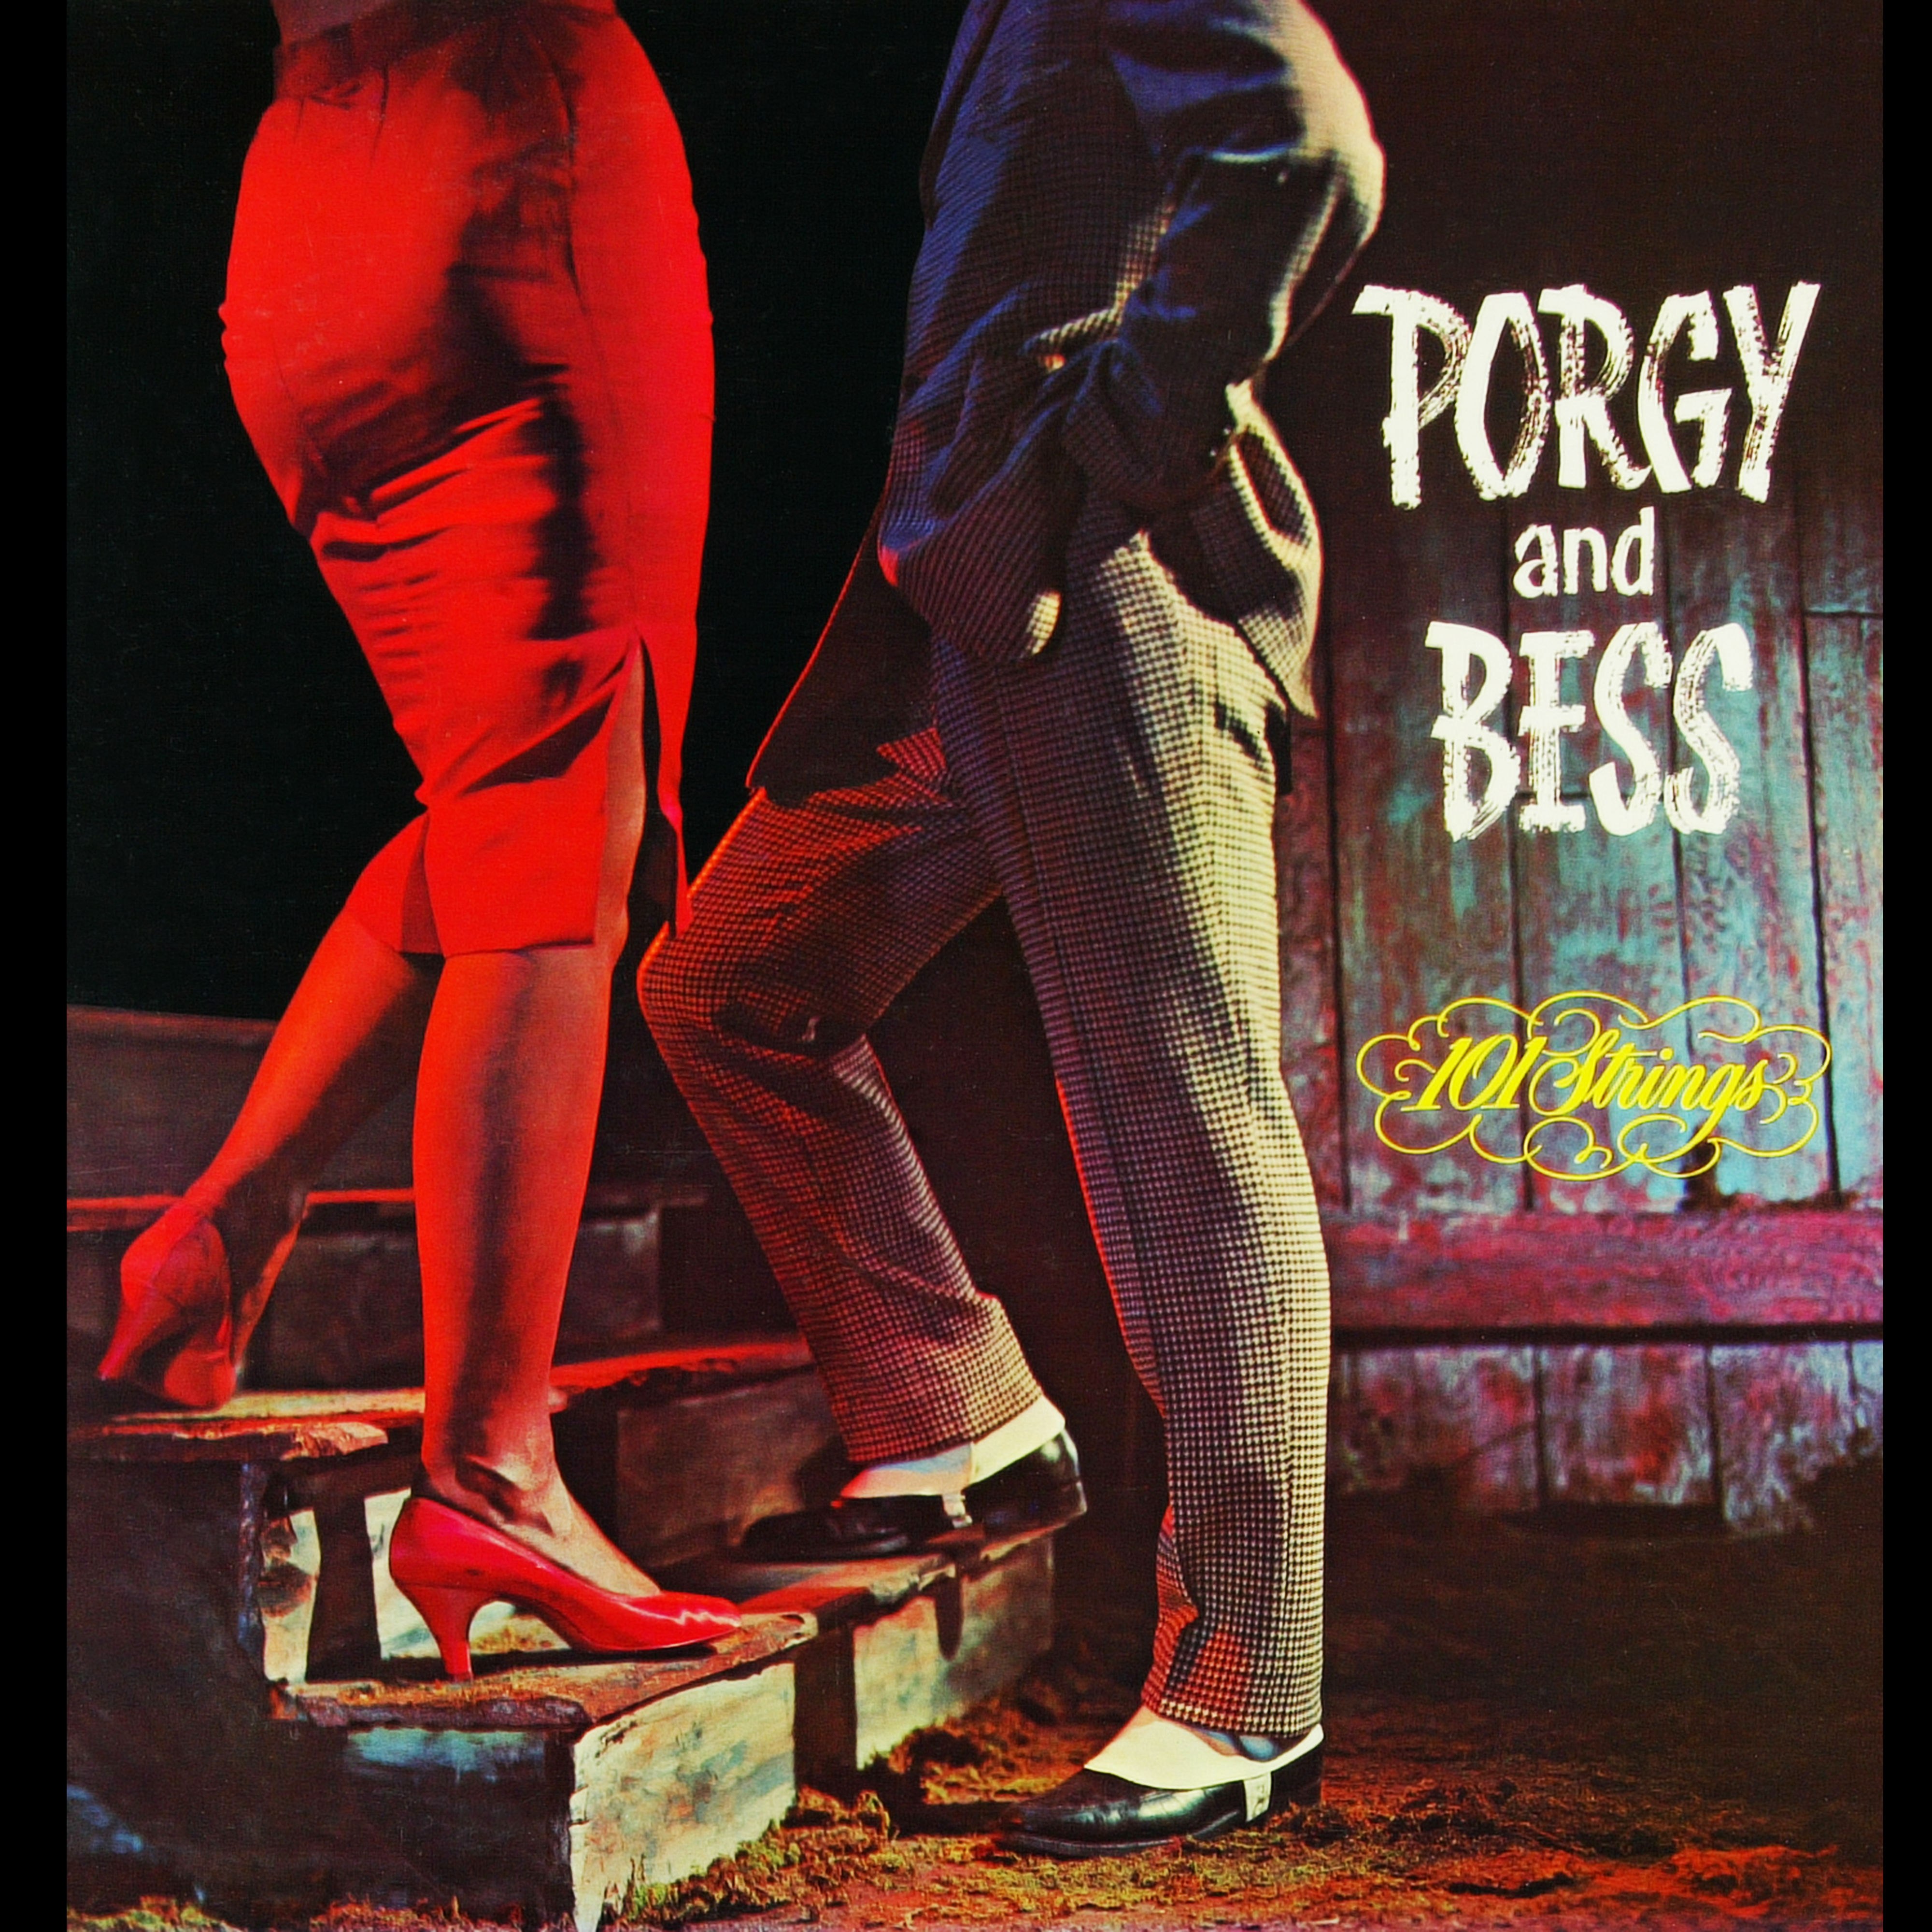 101 Strings Orchestra – Porgy and Bess (1959/2021) [FLAC 24bit/96kHz]